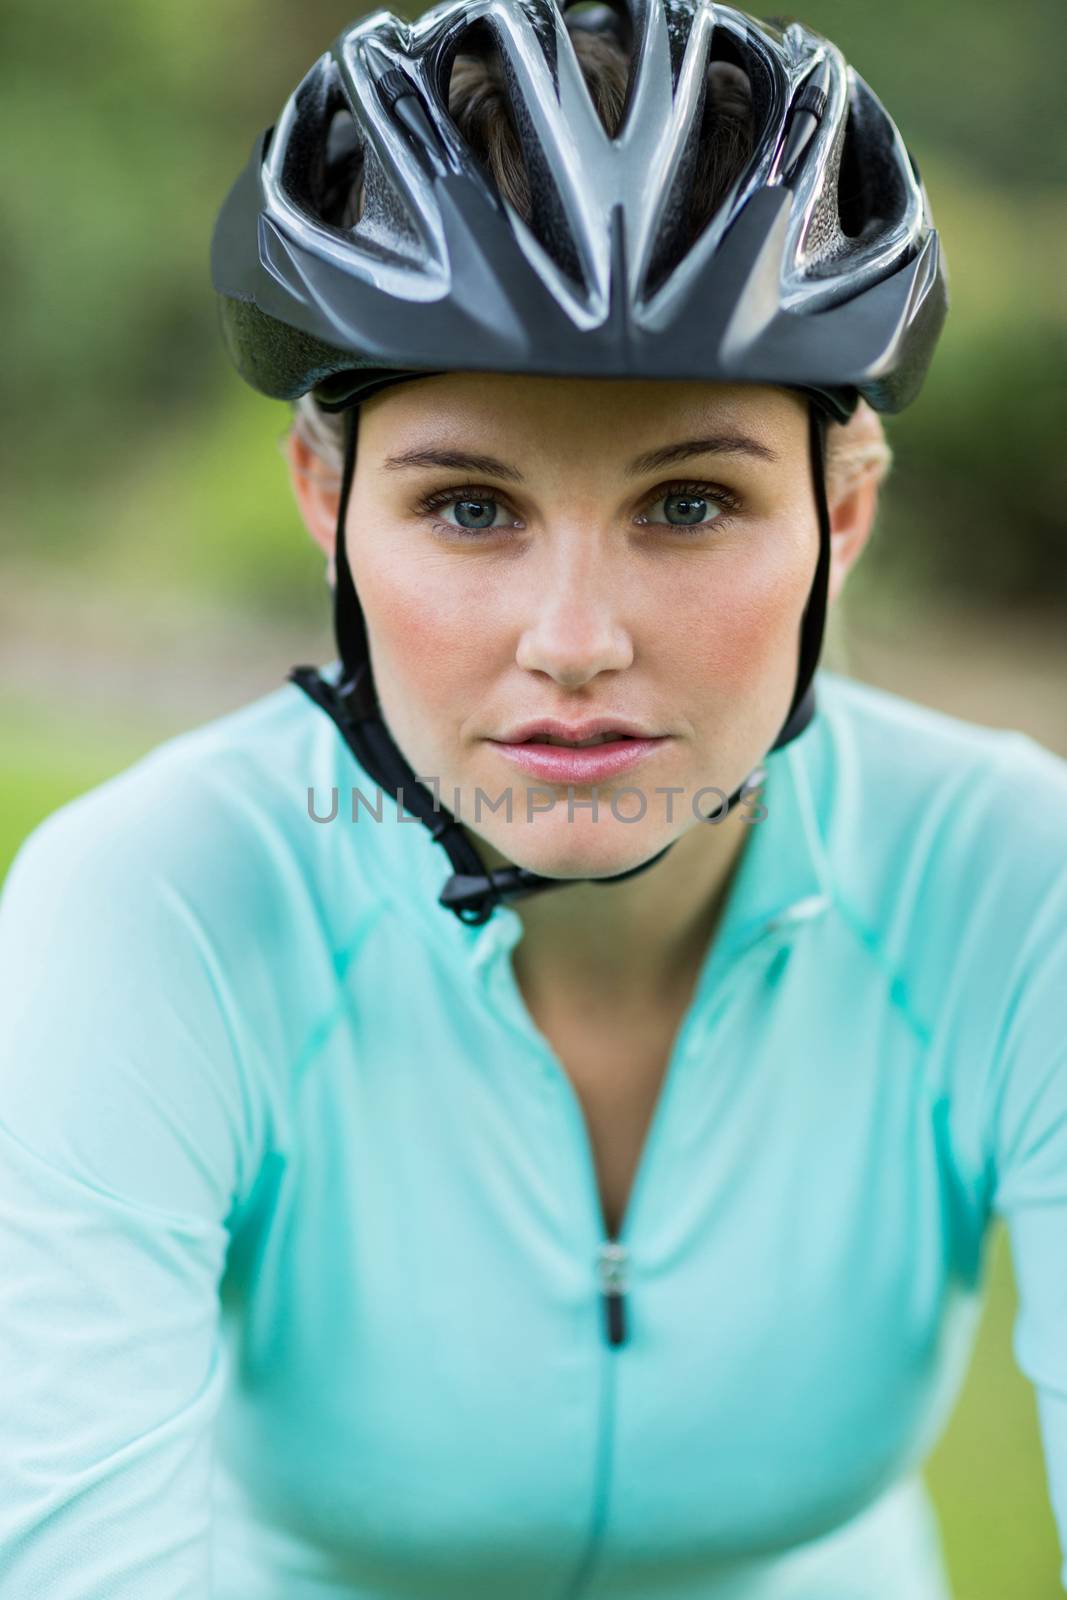 Portrait of female cyclist wearing bicycle helmet outdoors